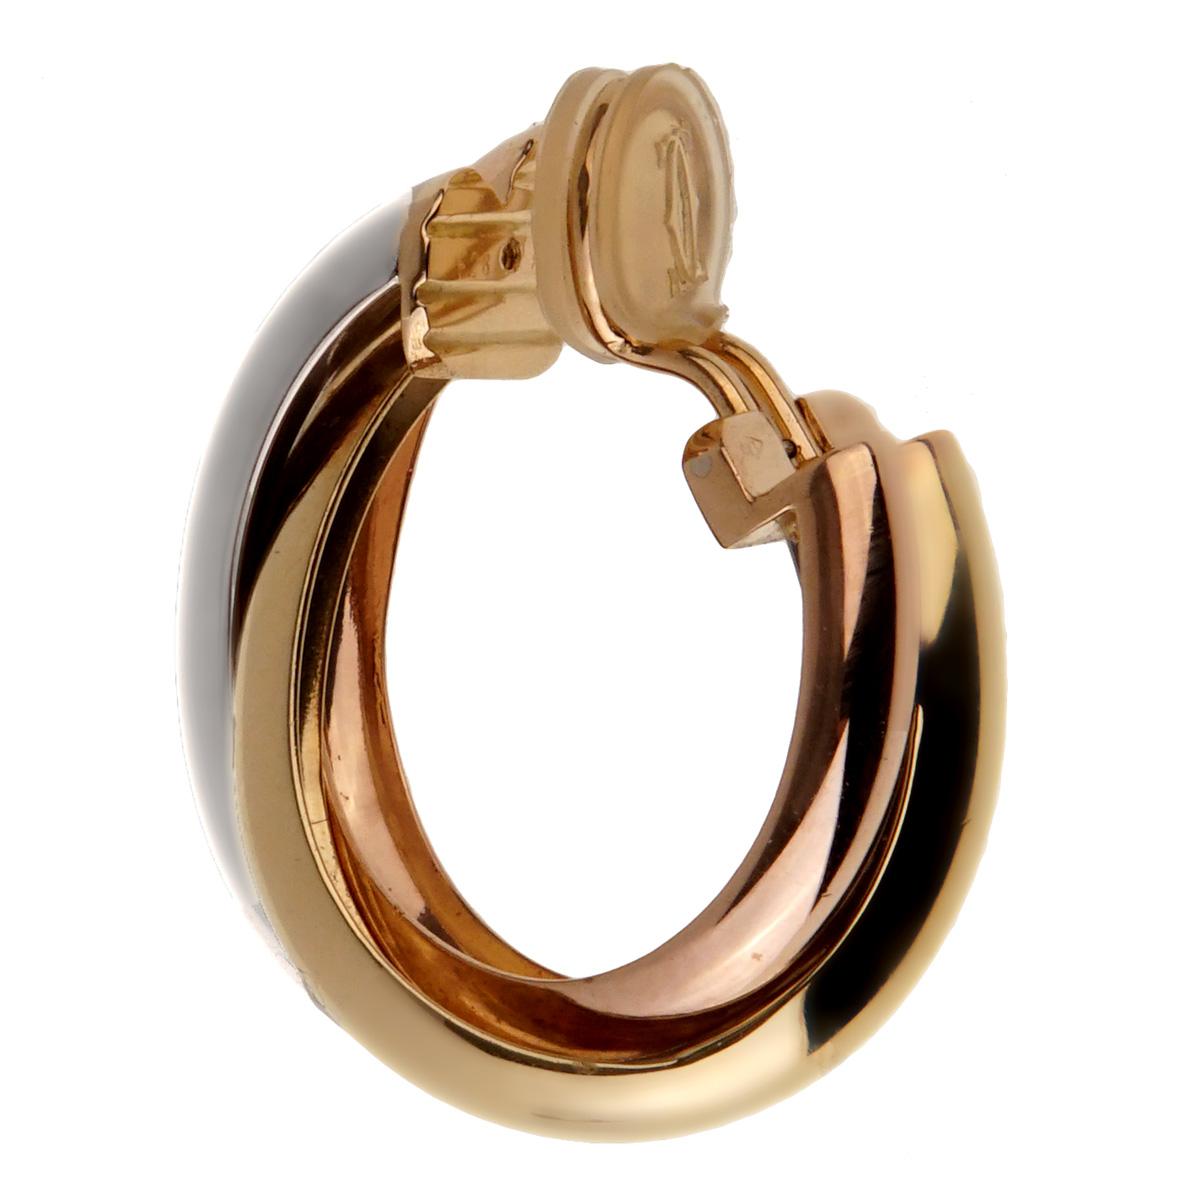 An iconic pair of Cartier Trinity Hoop earrings featuring white yellow and rose gold.